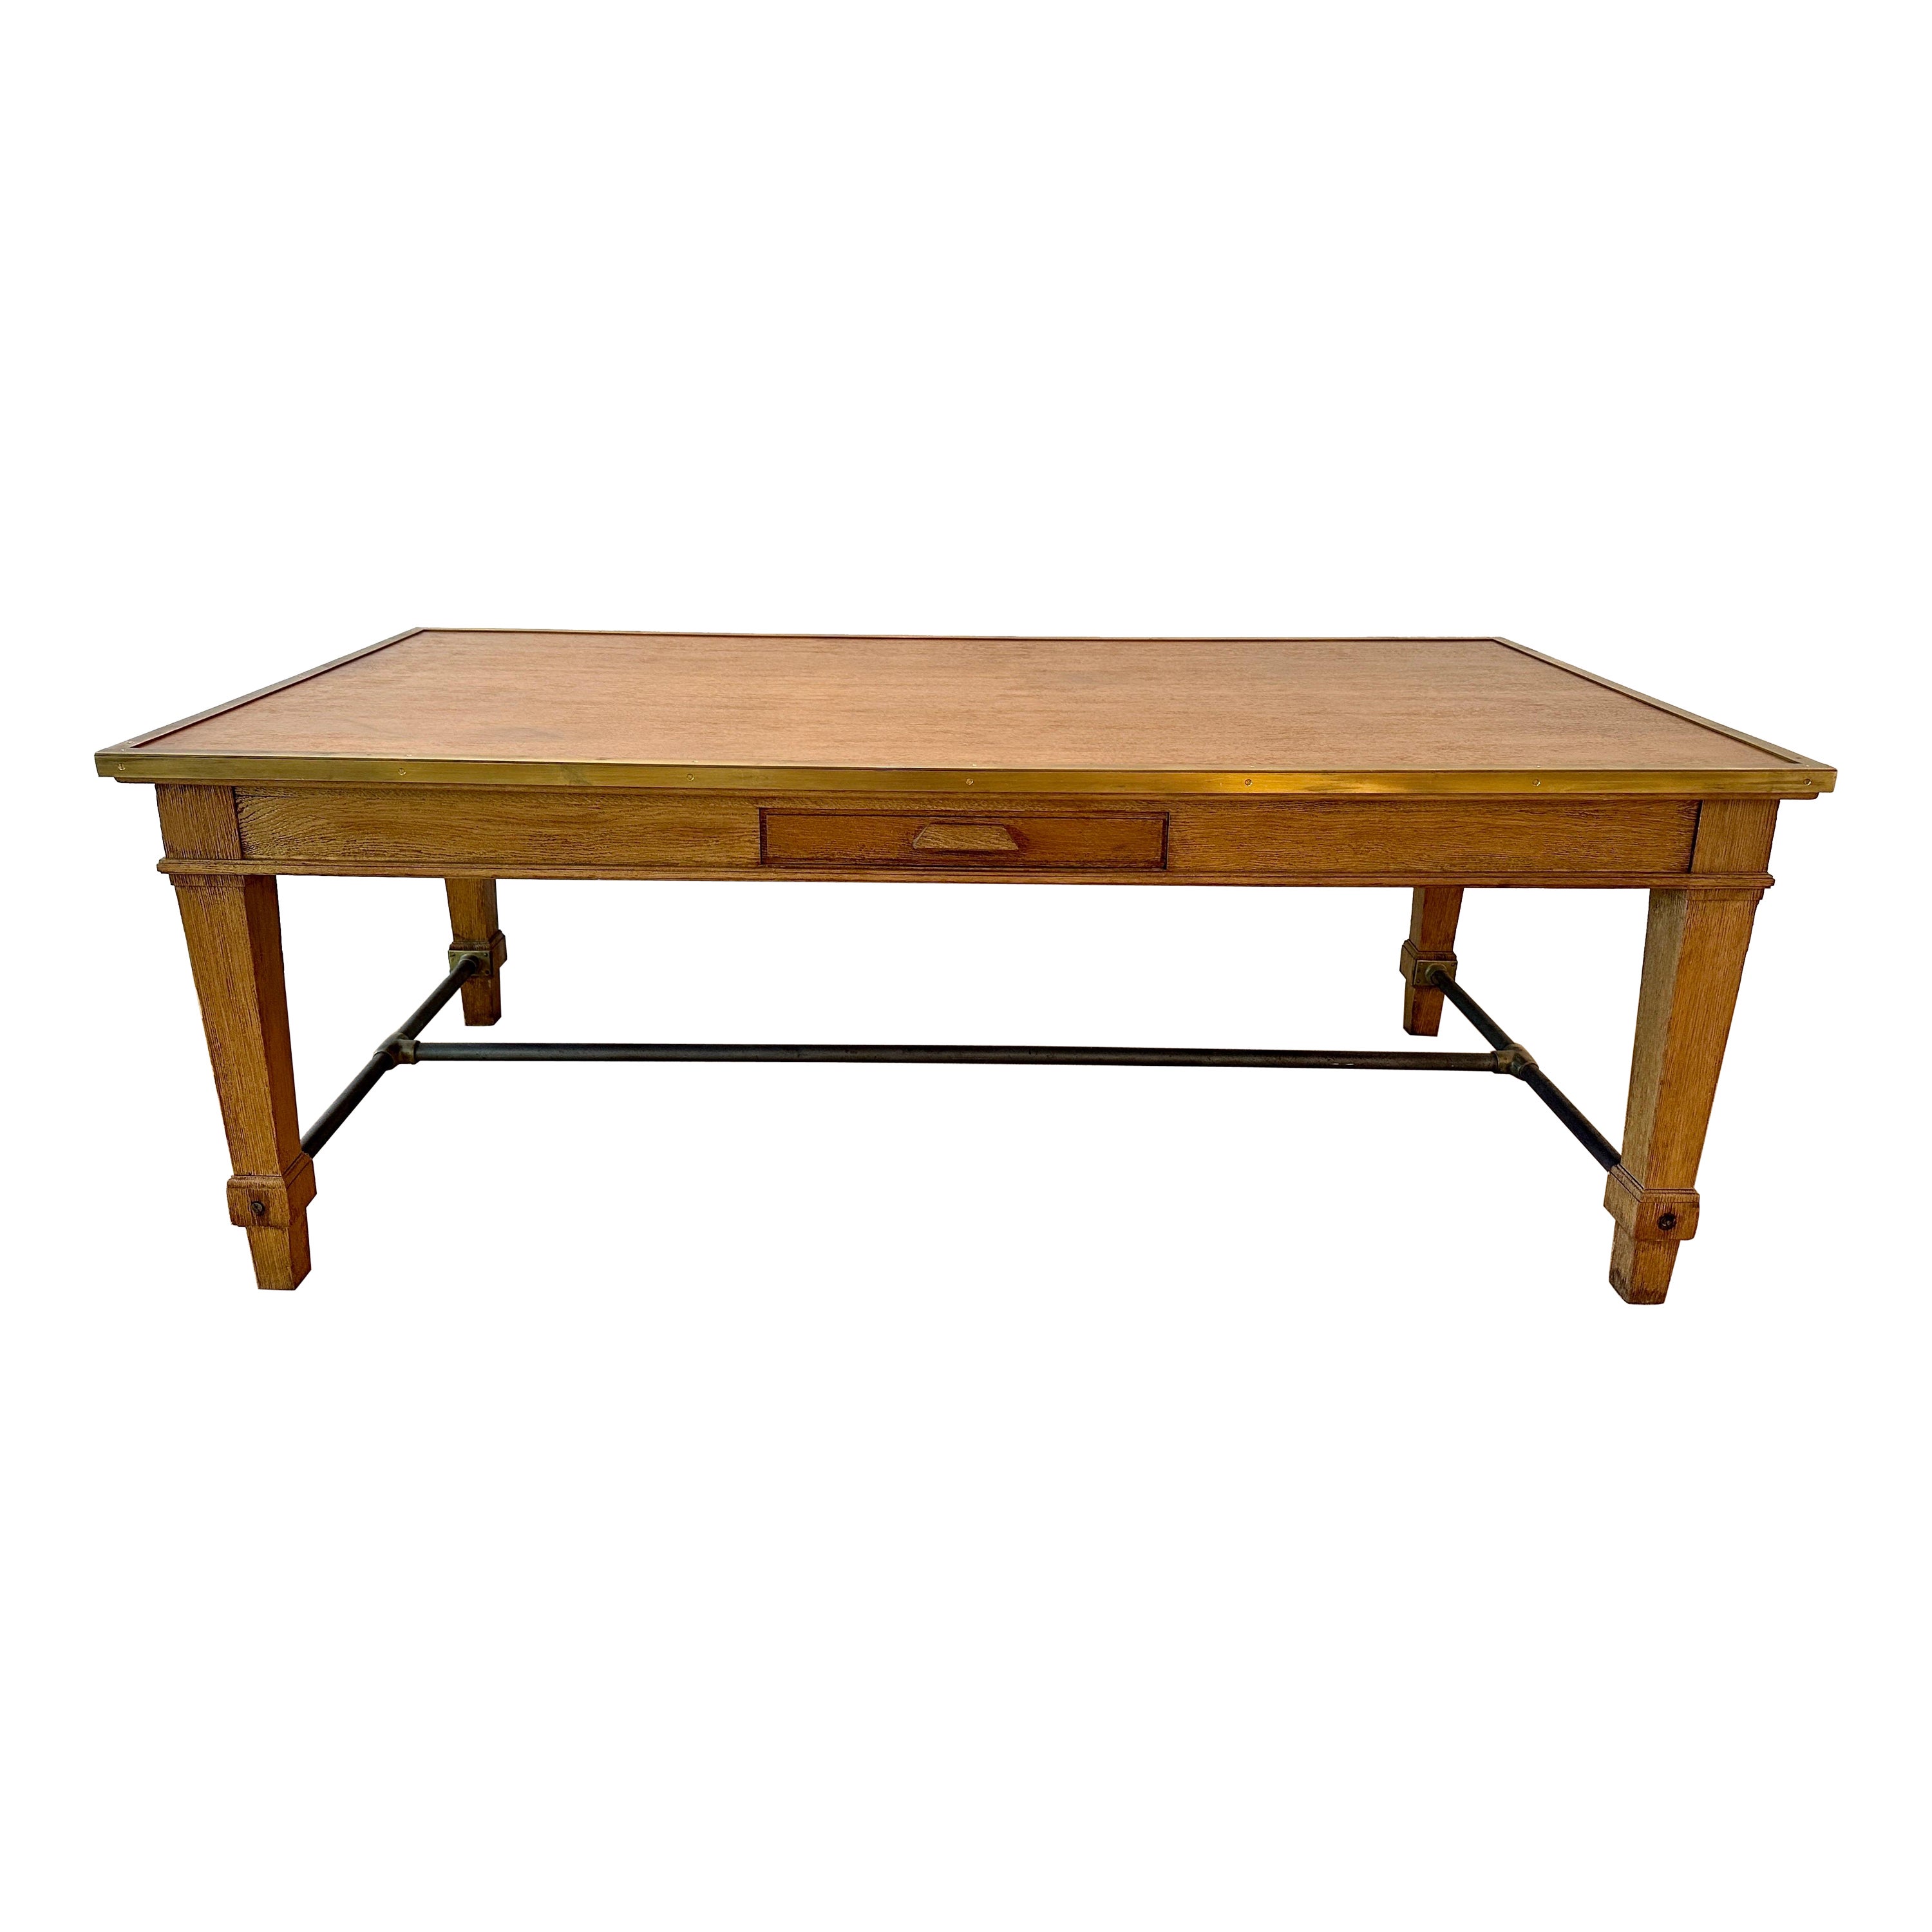 Oak, Iron and Brass Library Table Banc De France, circa 1920s For Sale